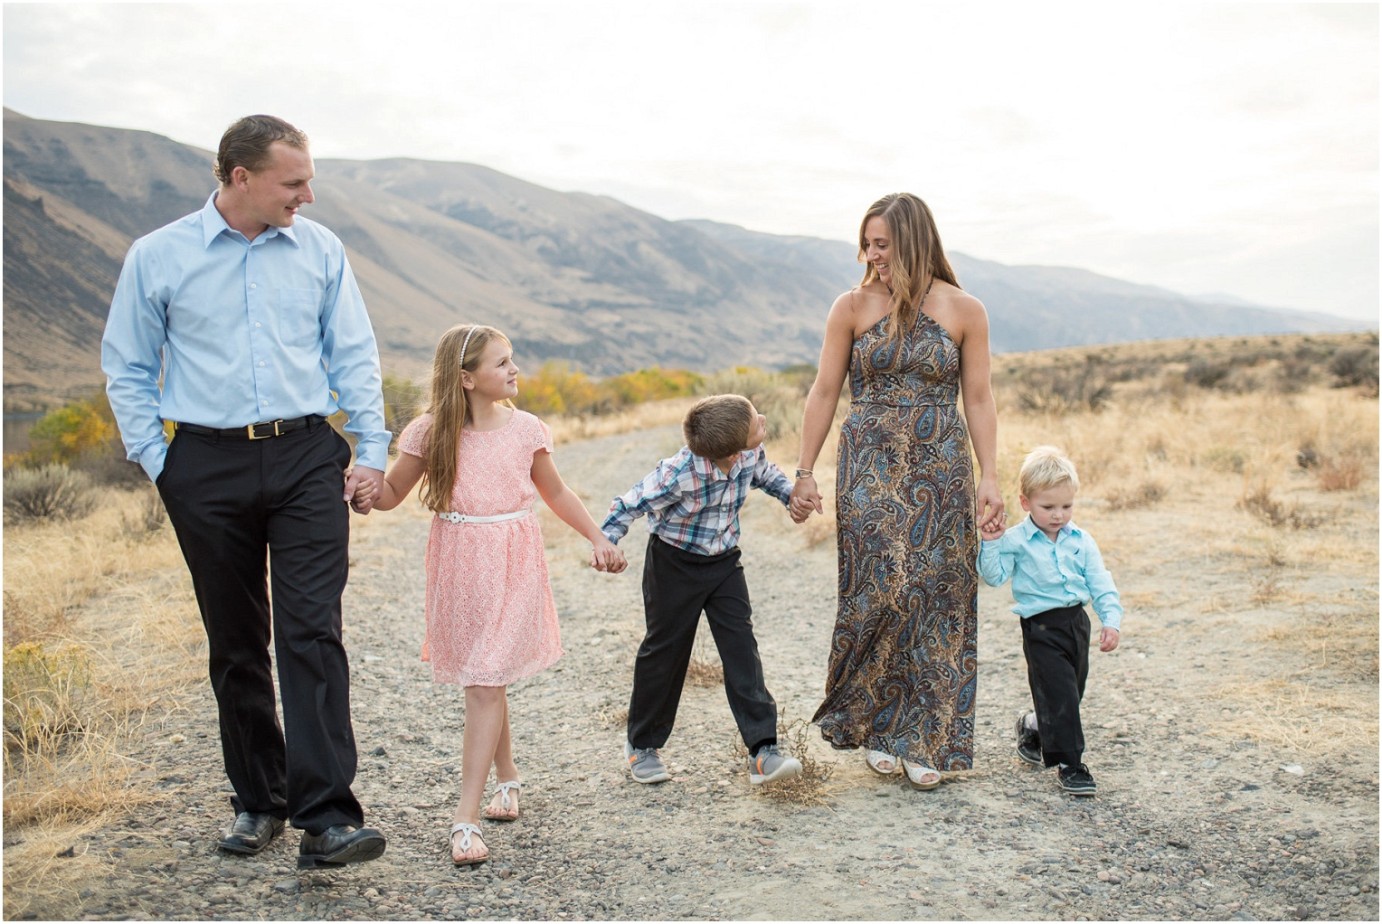 View More: http://mistycphotography.pass.us/eckenberg-family-session